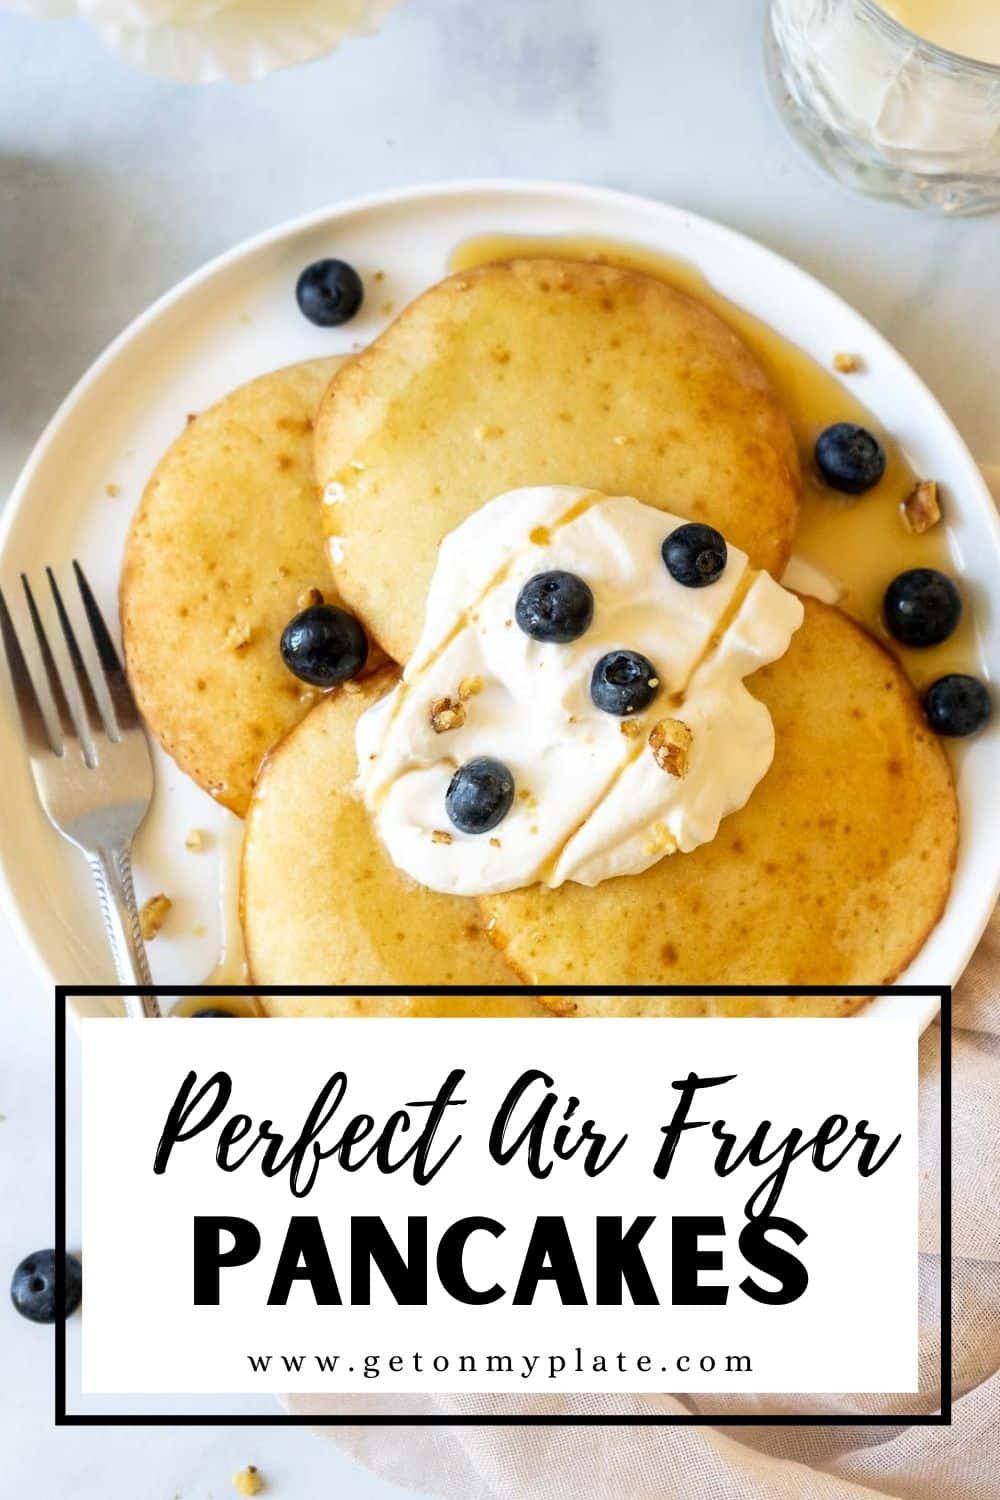 Four air fryer pancakes on a plate with whipped cream, blueberries, and maple syrup.